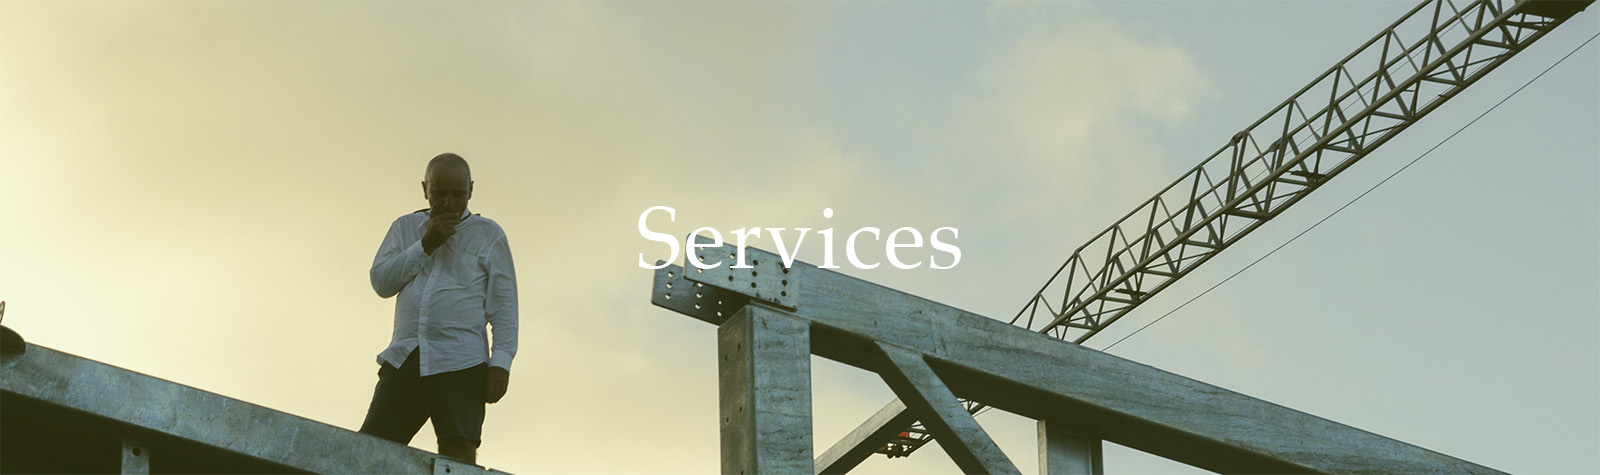 Services Civil Engineering & Construction